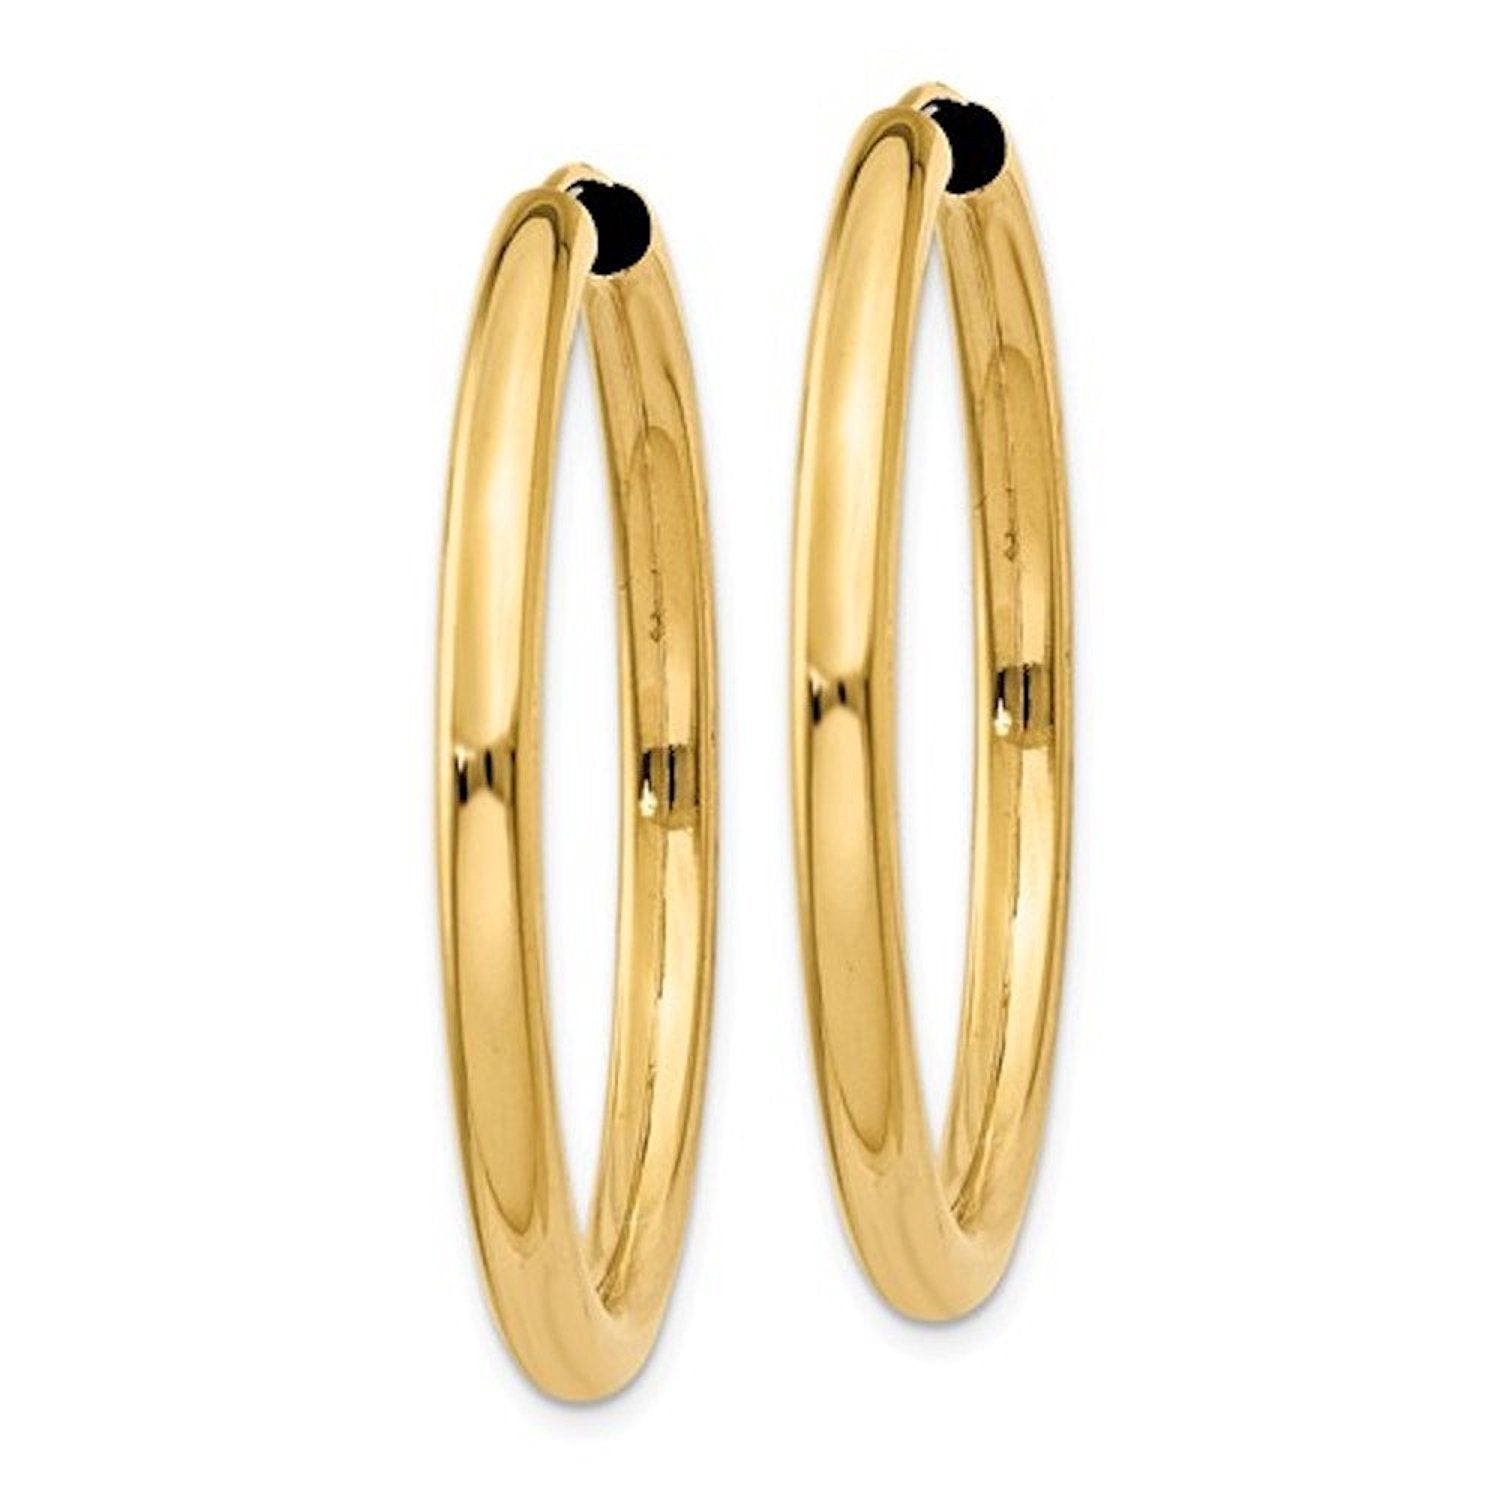 14k Yellow Gold Round Endless Hoop Earrings 35mm x 2.75mm